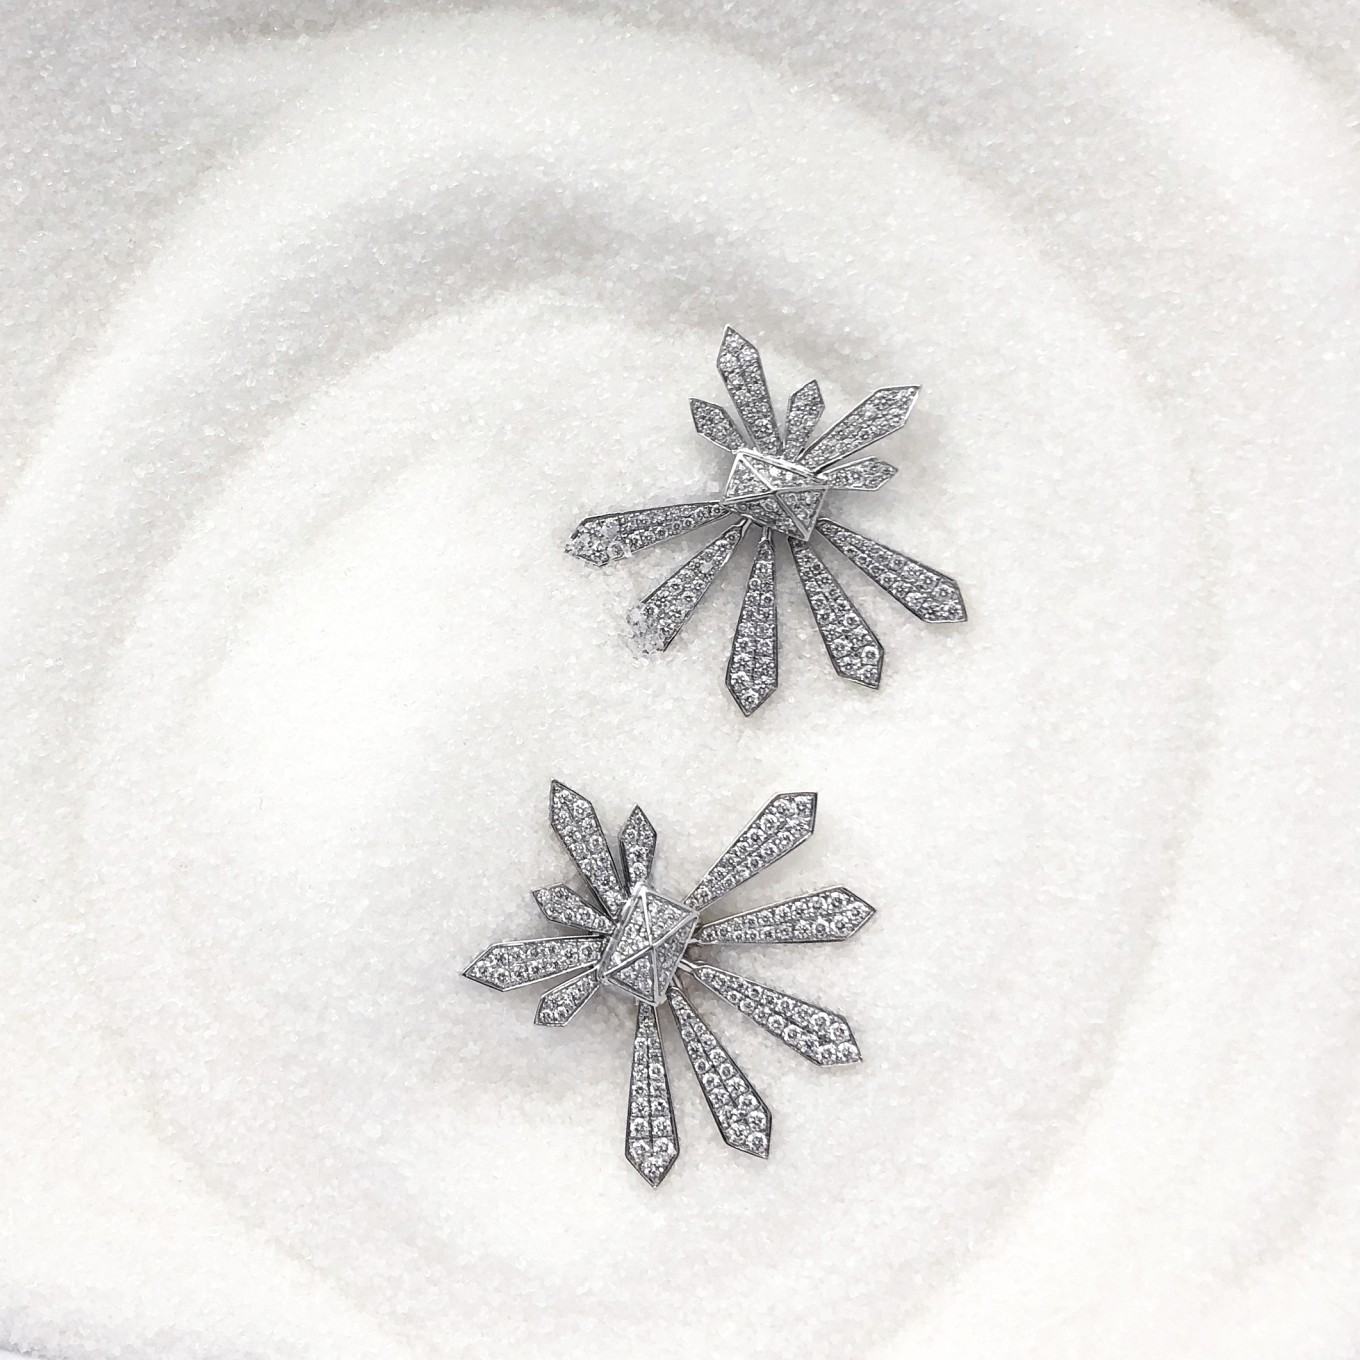 G SERIES DIAMOND “FLARE” EARRINGS<br/>PAIRED WITH DIAMOND "FLARE" JACKETS